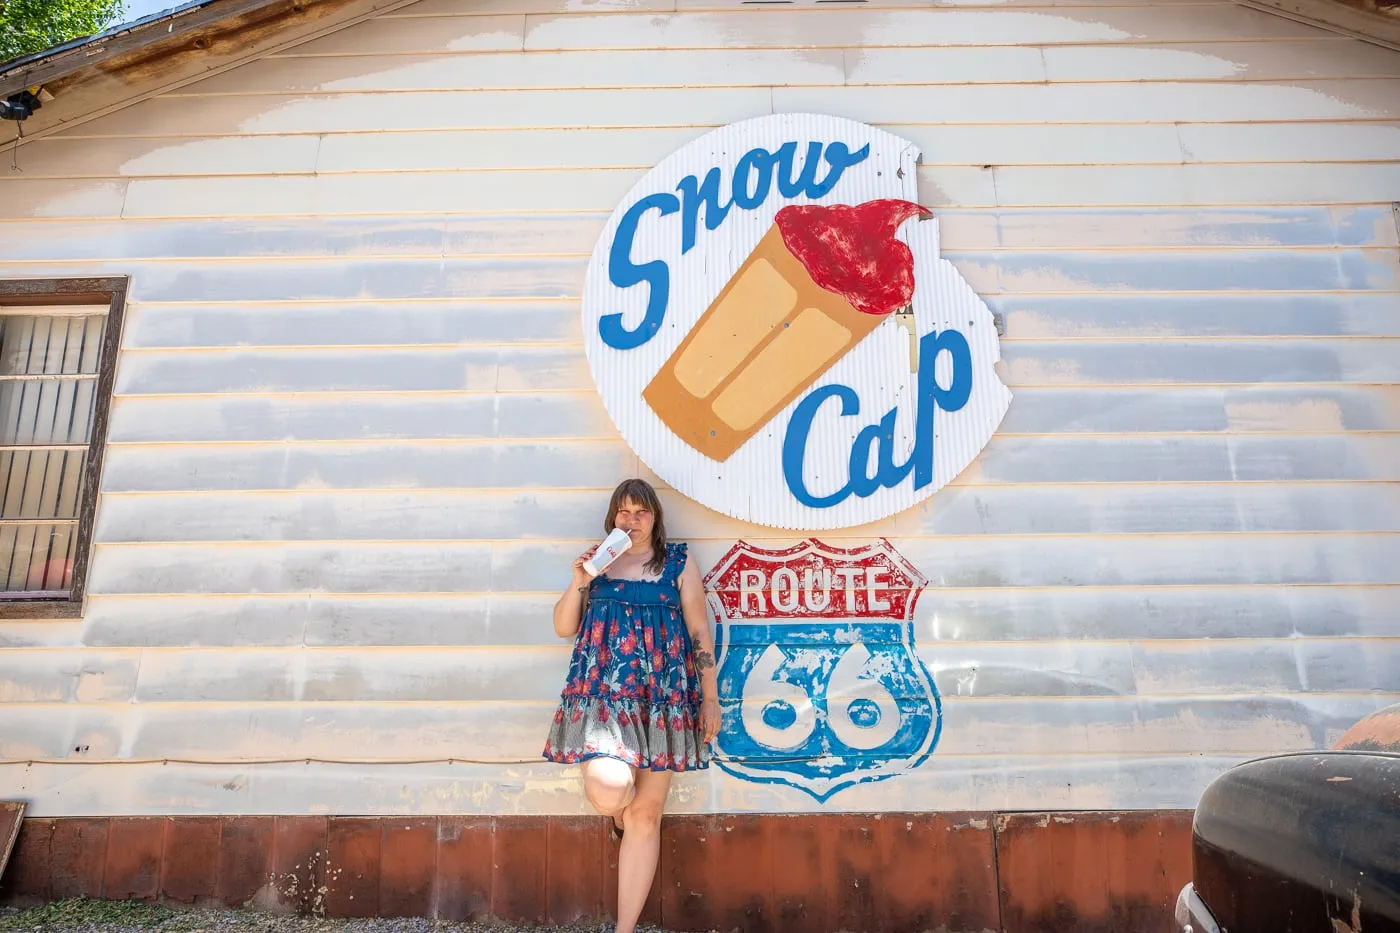 Drinking a milkshake at the Snow Cap Route 66 Mural at Delgadillo’s Snow Cap in Seligman, Arizona - Route 66 restaurant and Drive-In Diner